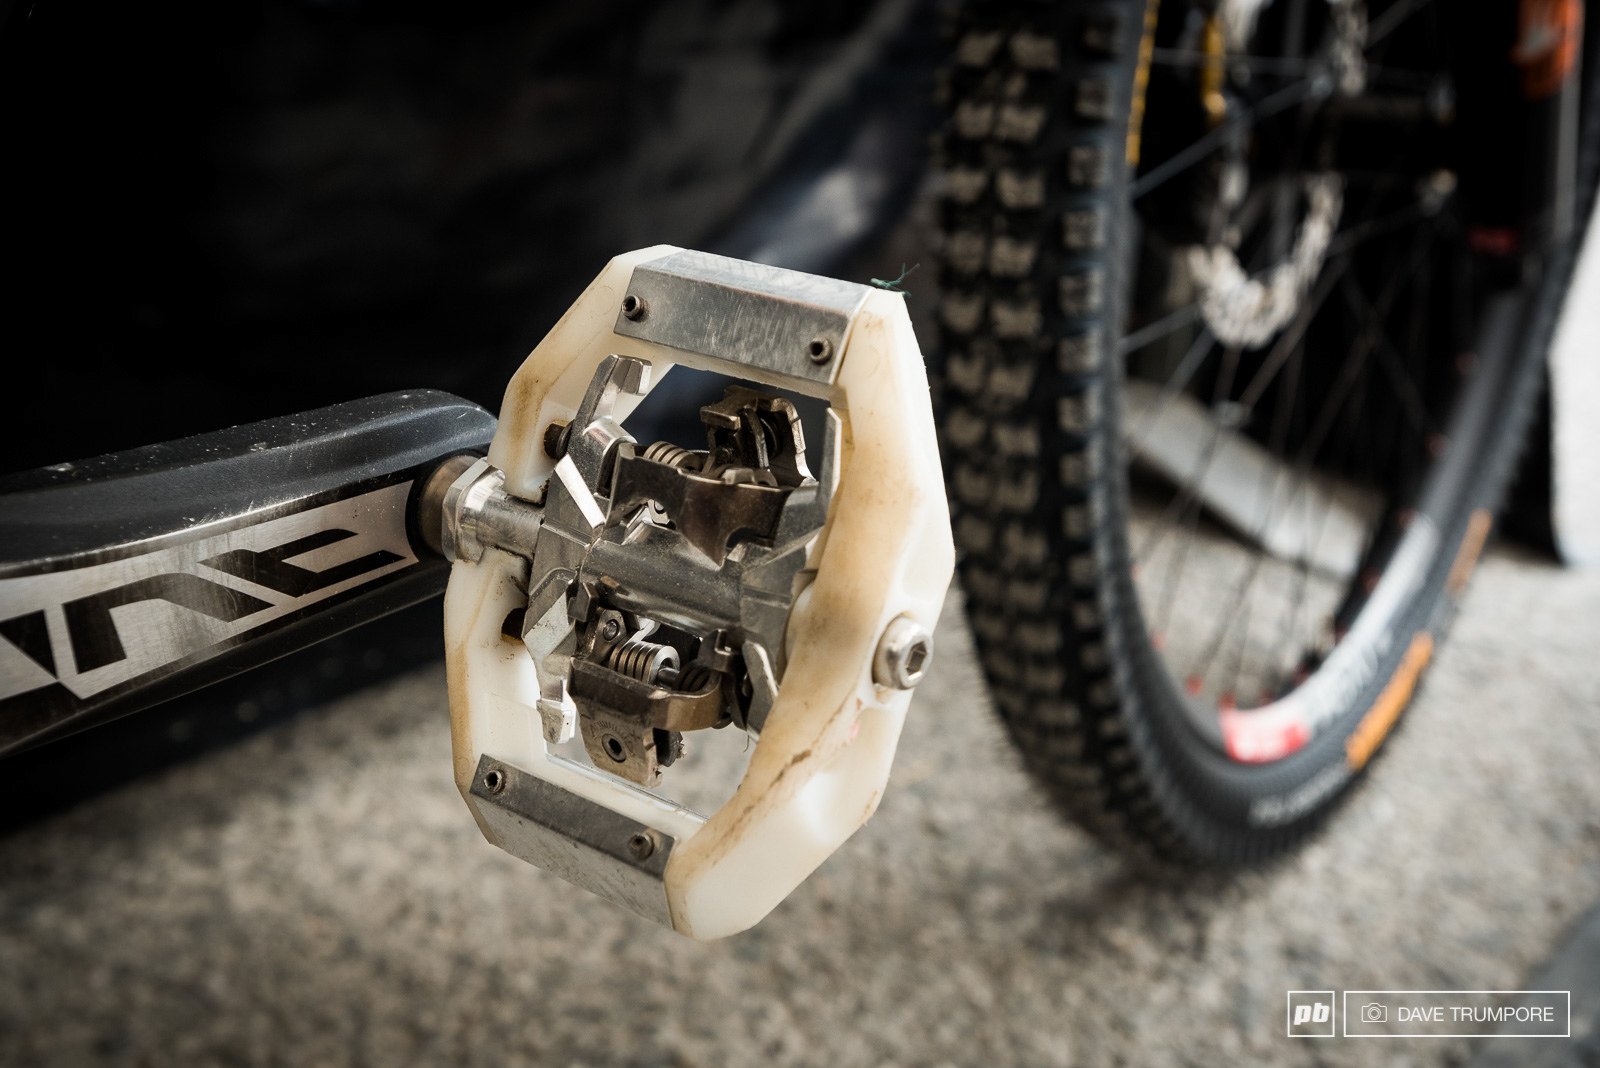 Dale's shimano pedals. Different plastics than what Neko has been running